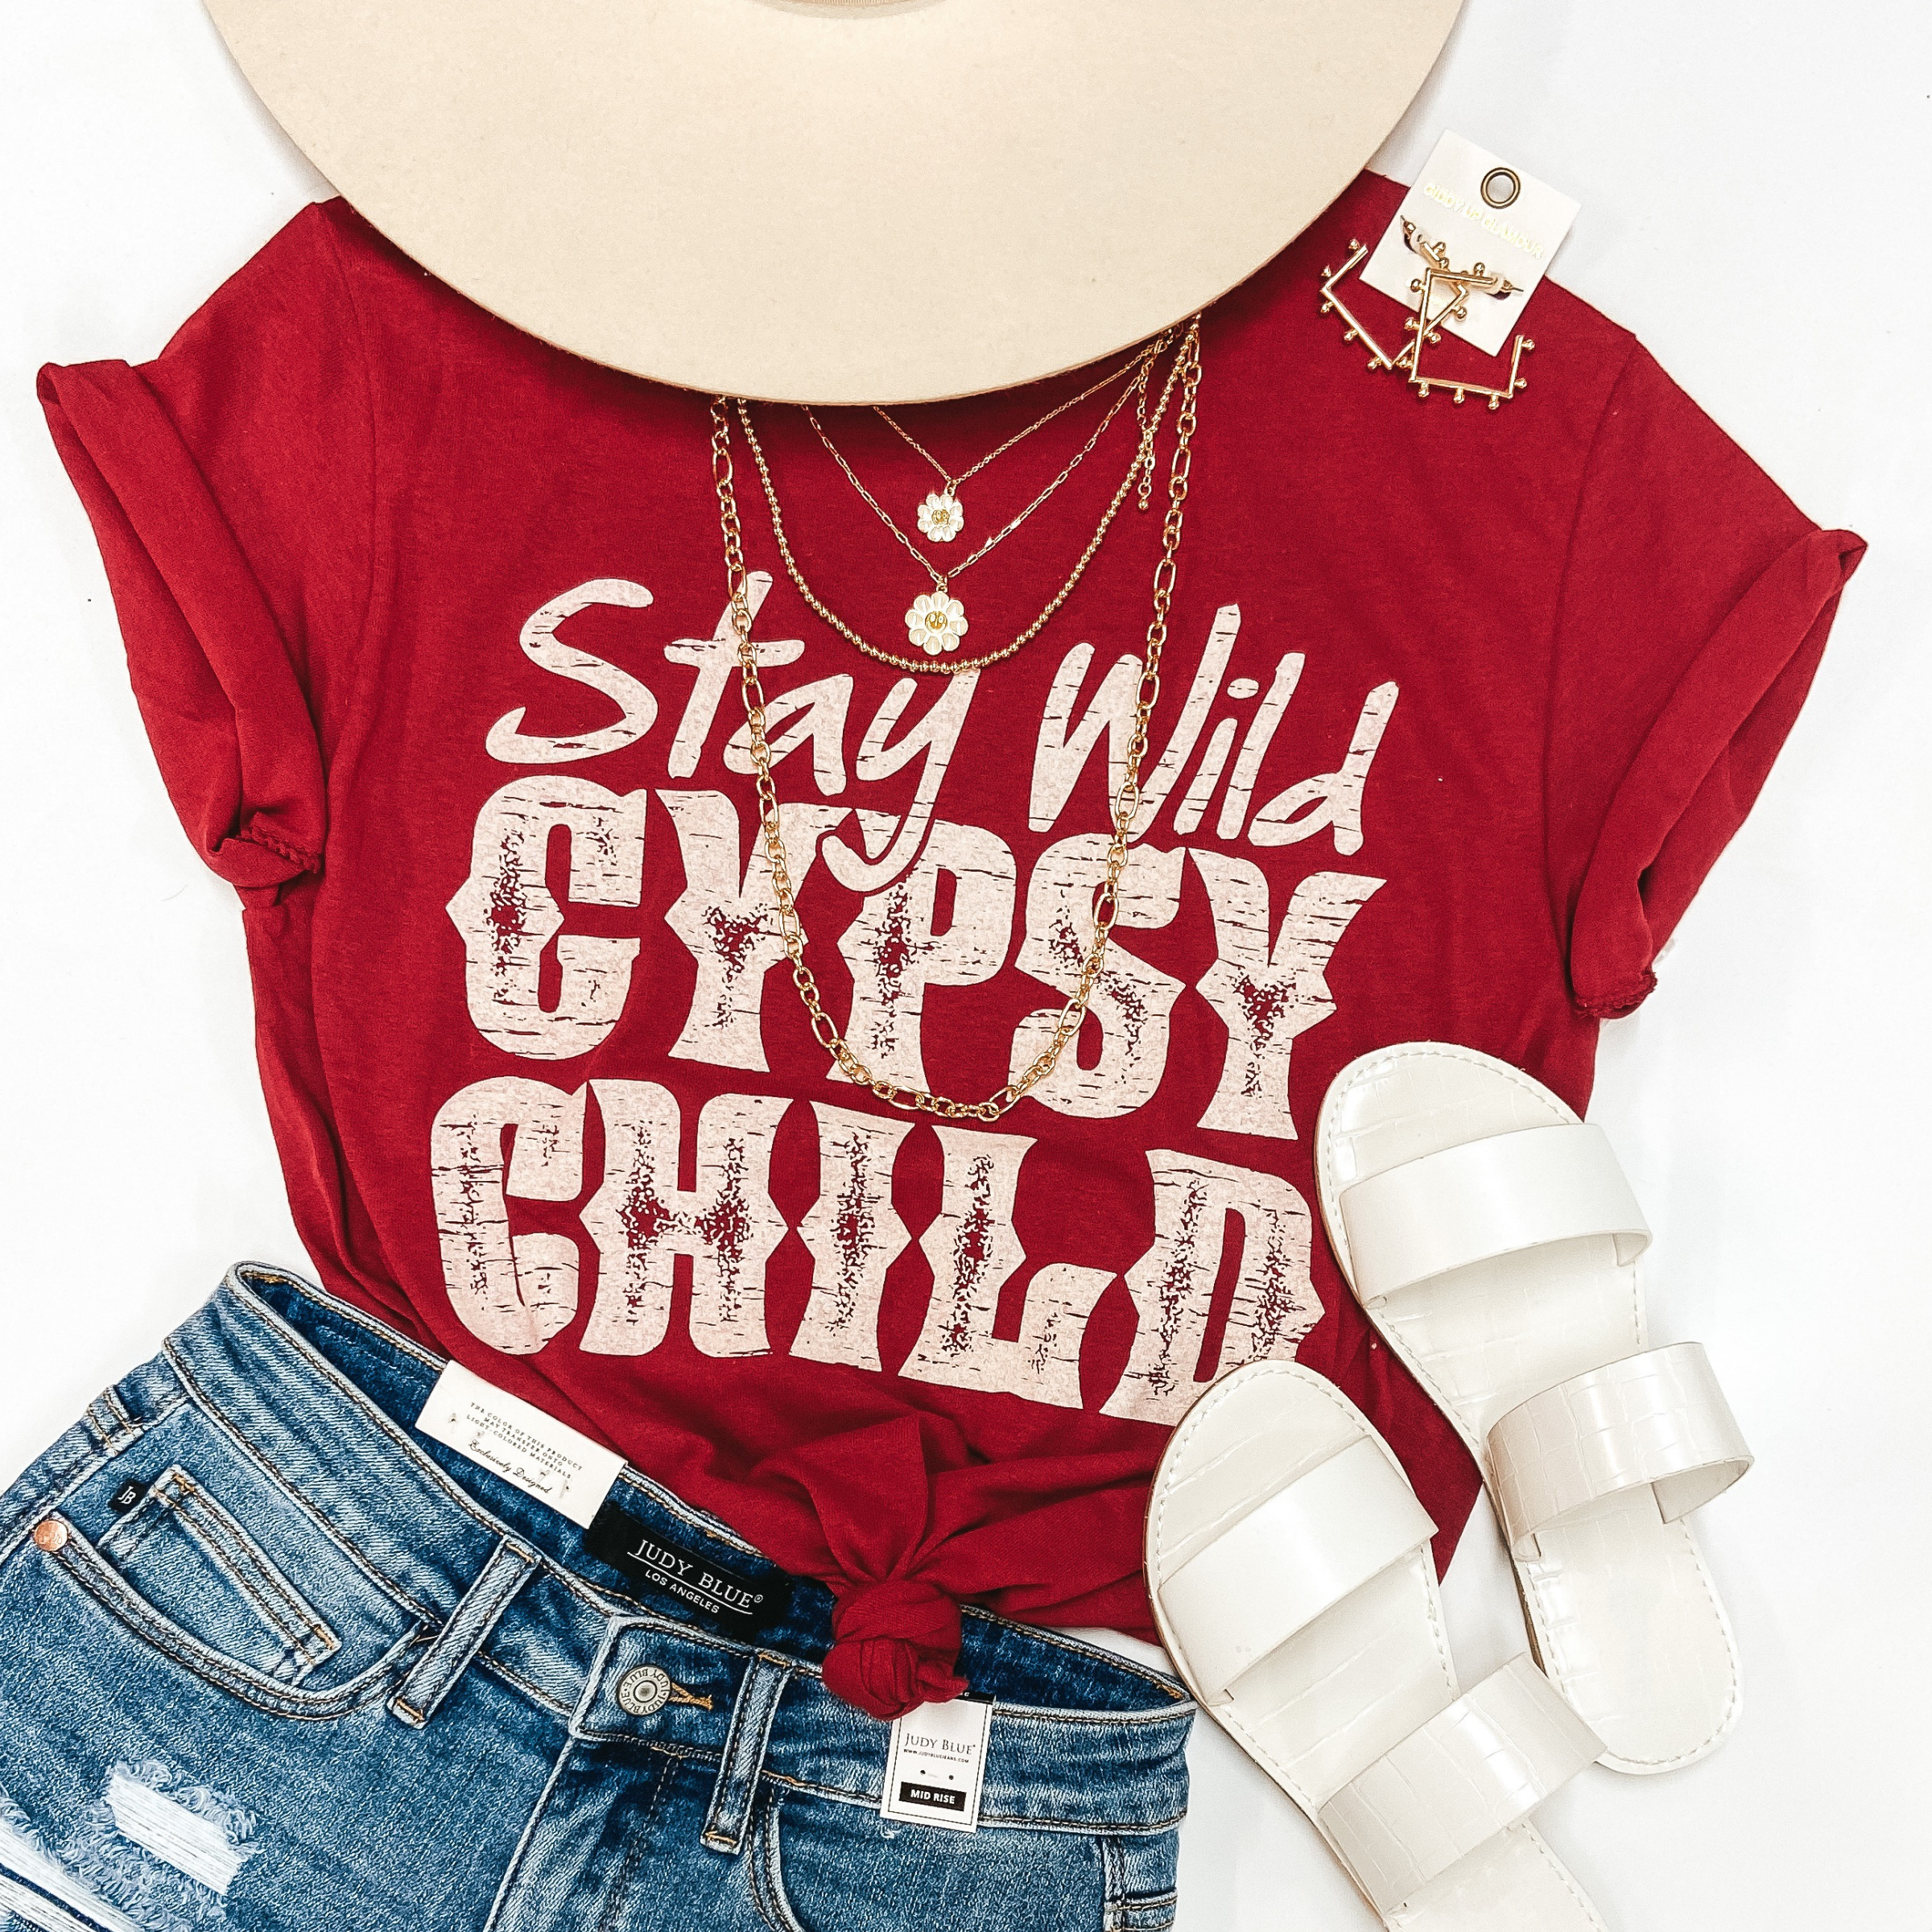 A red graphic tee with cuffed sleeves and a knotted front. The tee shirt has a graphic that says "Stay Wild Gypsy Child" in ivory writing. Tee shirt is pictured on white background with denim shorts, gold jewelry, white sandals, and an ivory hat.